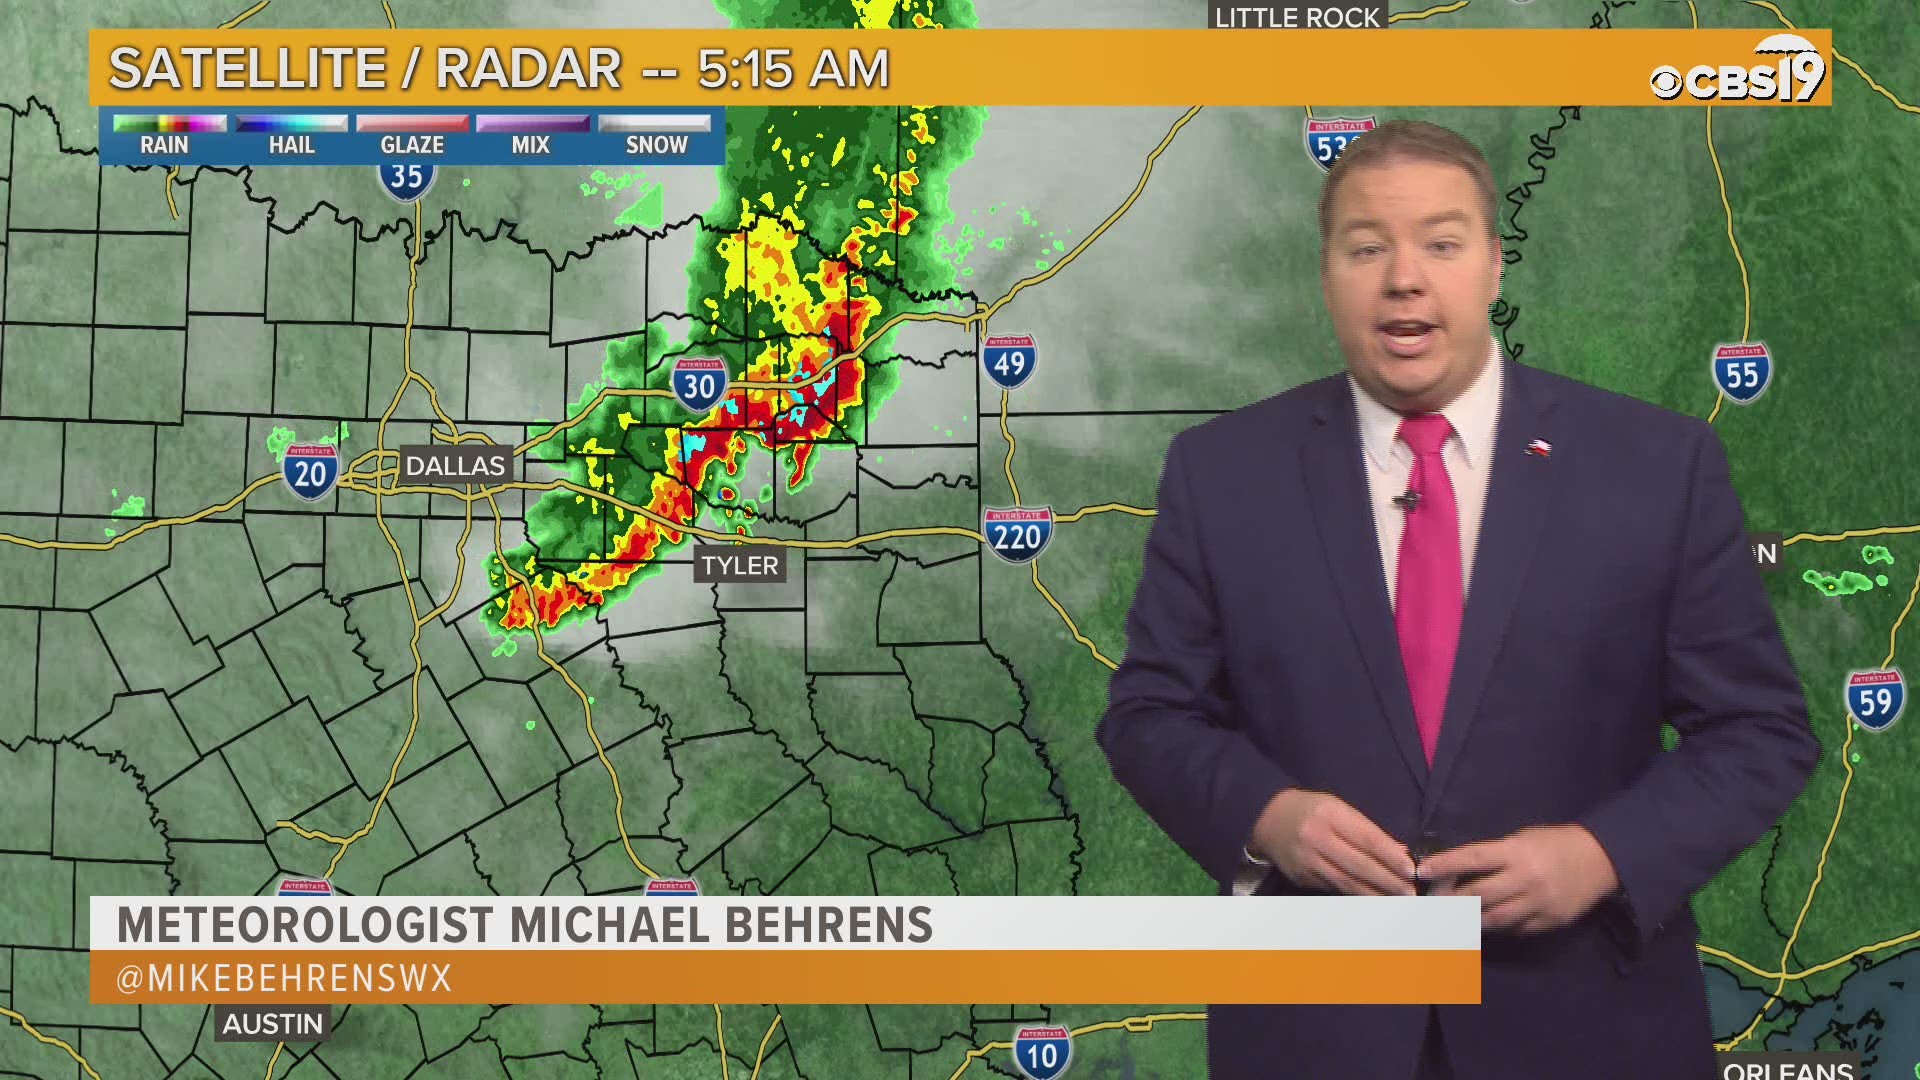 Severe weather is looking likely for East Texas as we head into Wednesday evening and the overnight. Meteorologist Michael Behrens let's us know the latest!